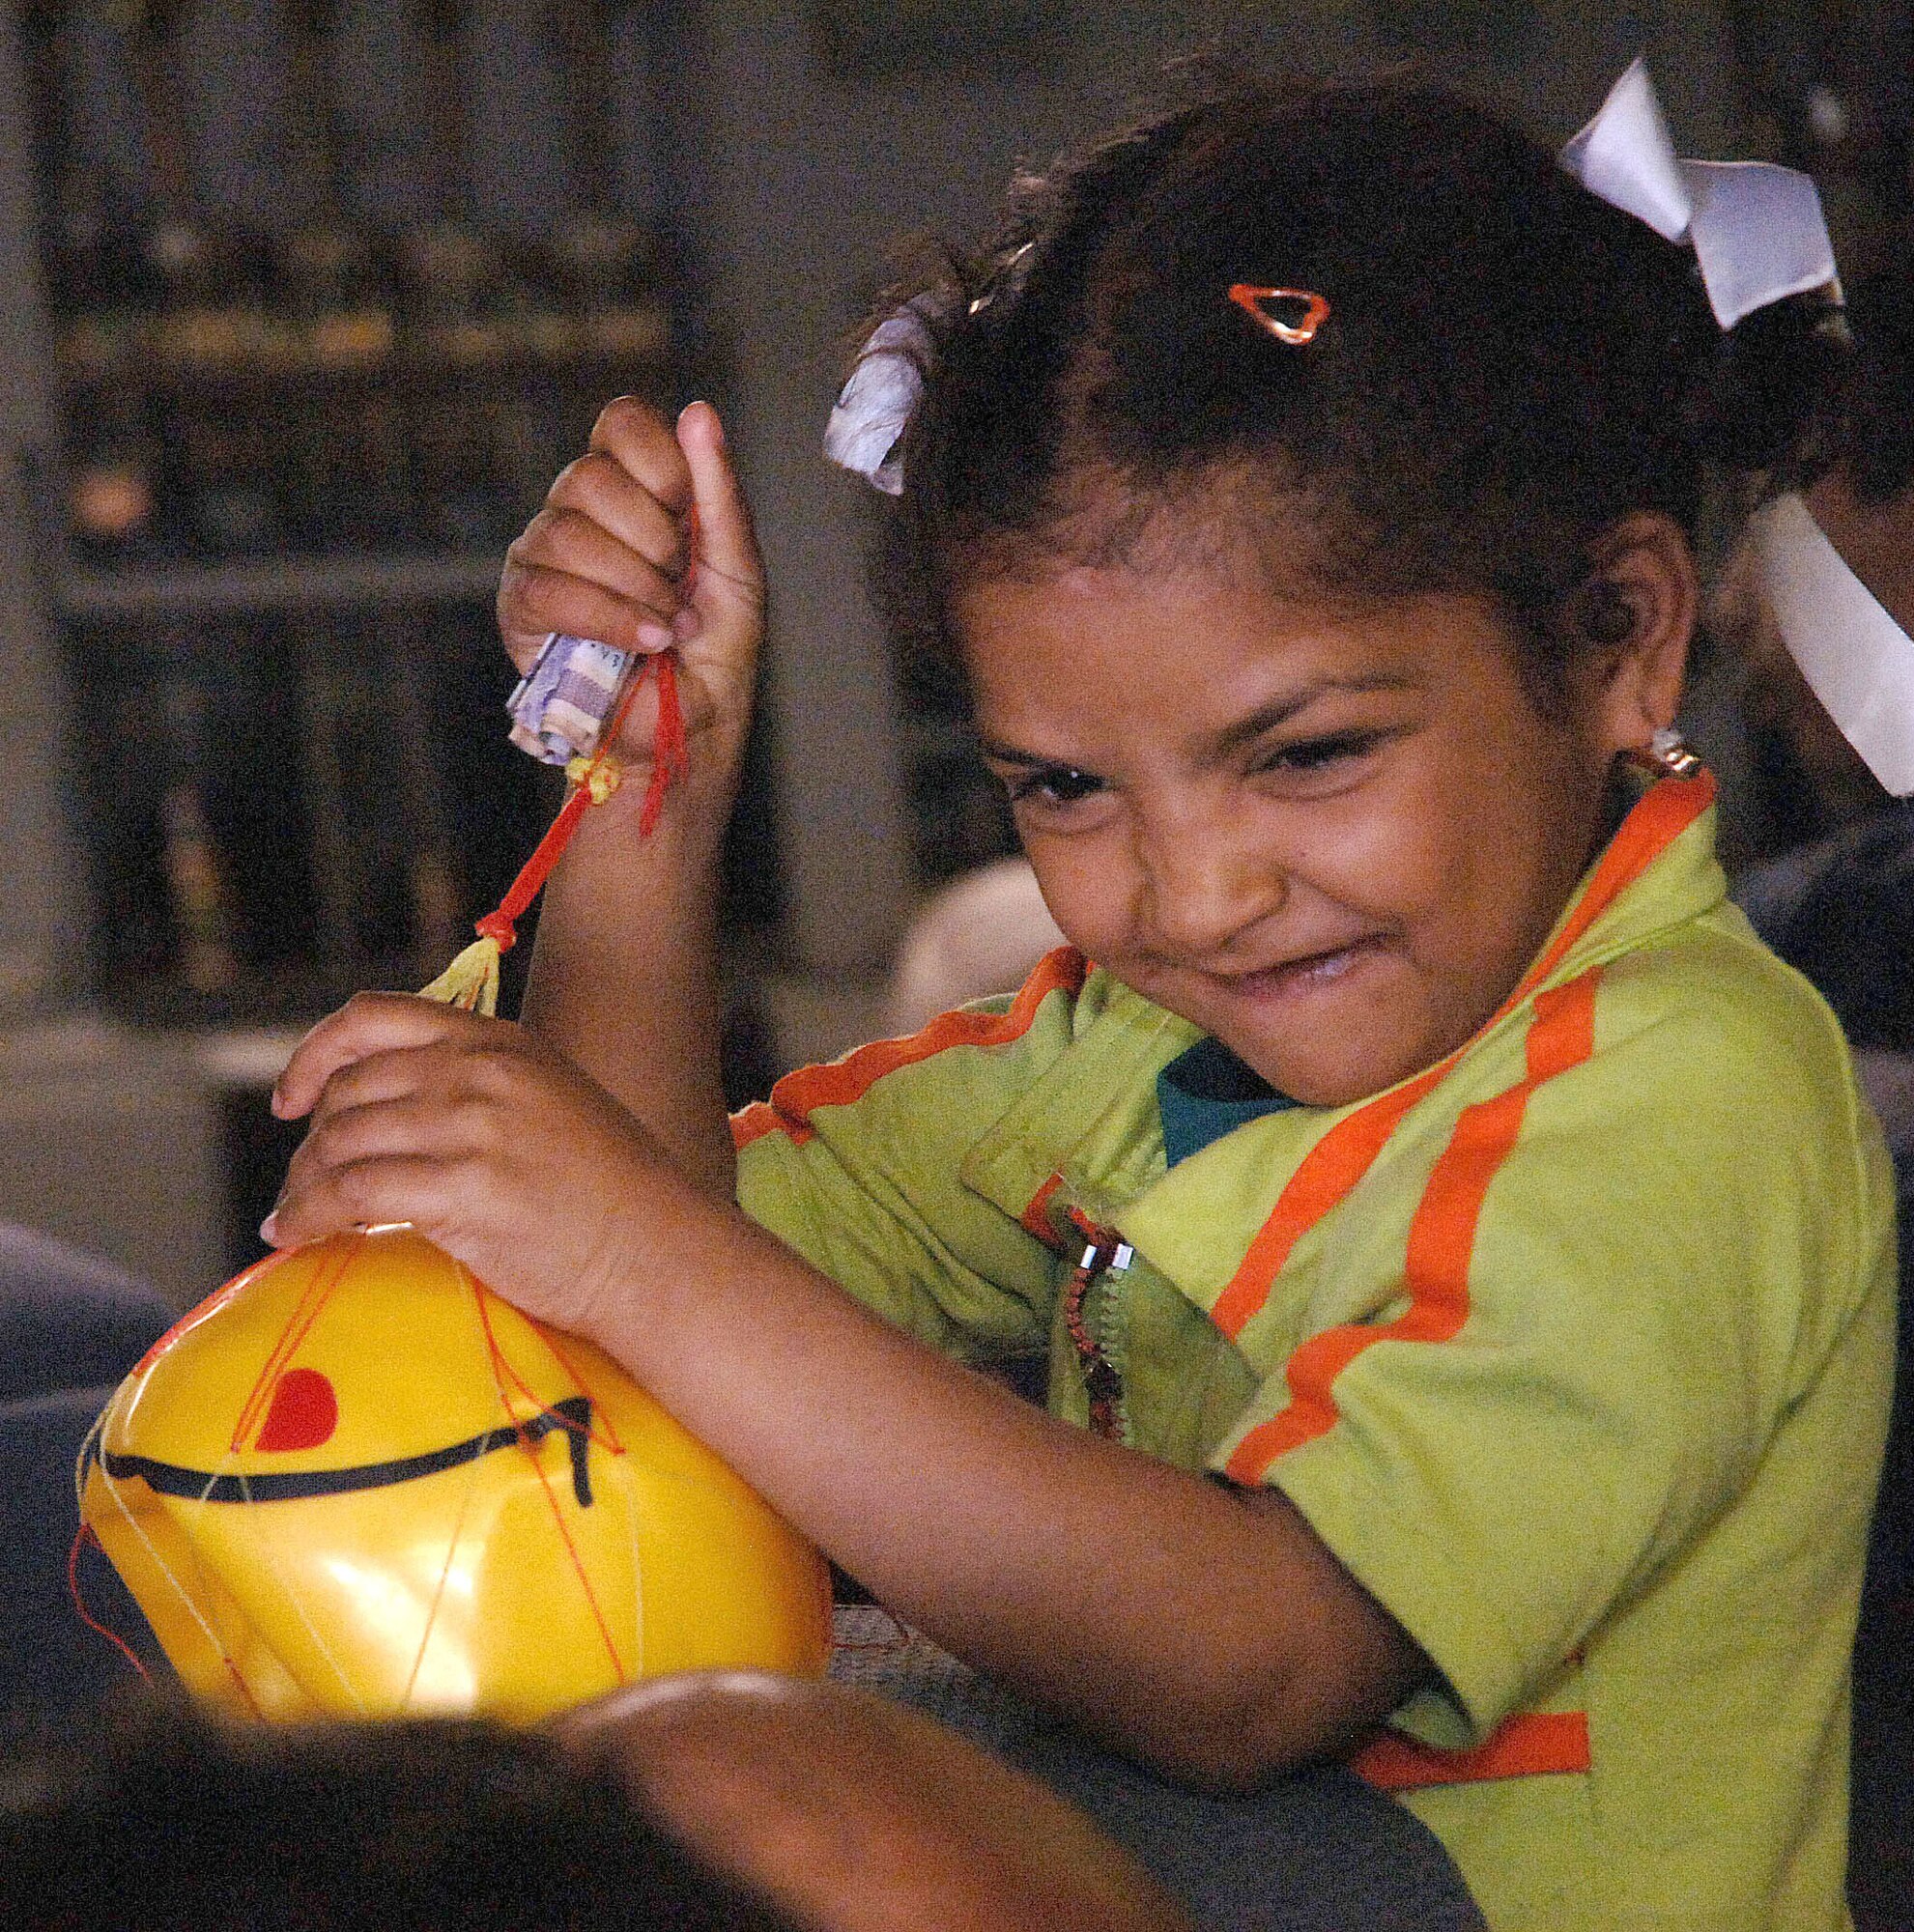 An Iraqi girl plays aboard an Air Force C-17 Globemaster III at Baghdad International Airport, Iraq, on Saturday, April 29, 2006. She was one of more than 100 Iraqi children who received surgery in Amman, Jordan, thanks to Operation Smile, an organization that provides corrective surgery for cleft palates and cleft lips. The children were flown back to Iraq on the C-17. (U.S. Air Force photo/Master Sgt. Will Ackerman)